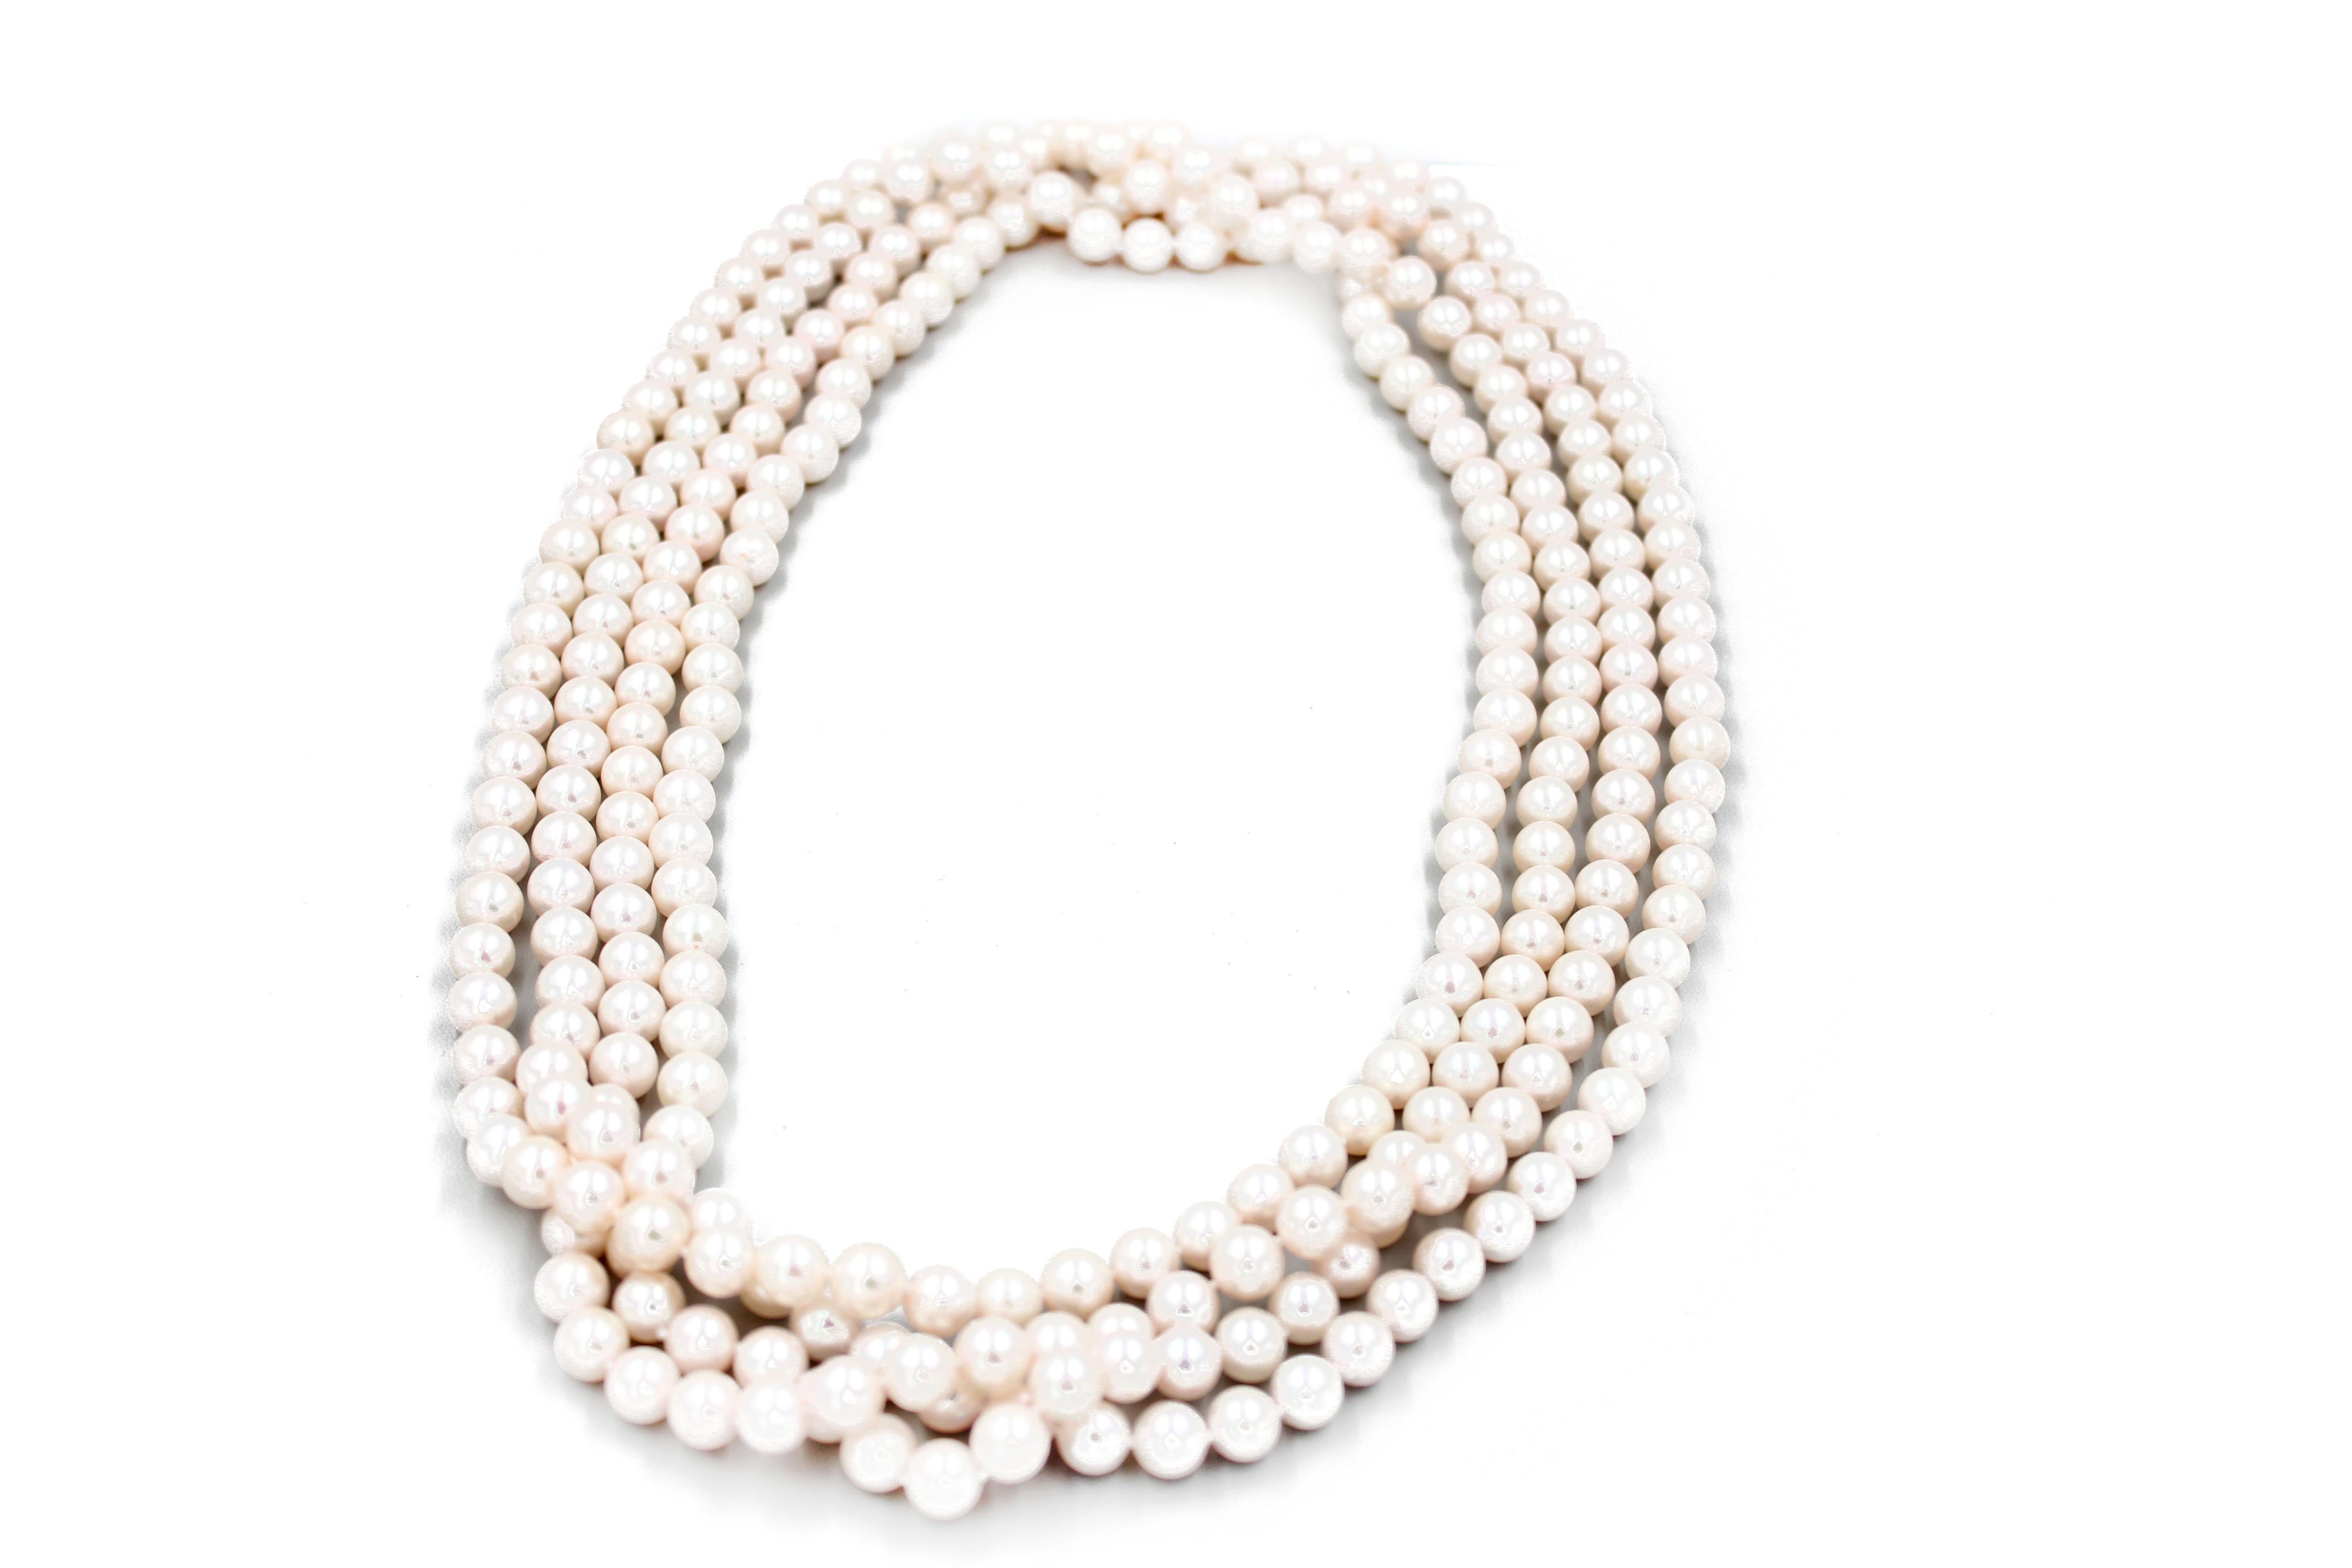 Japanese Akoya White Pearls
9-10 MM Pearl Size
48 Inches Long